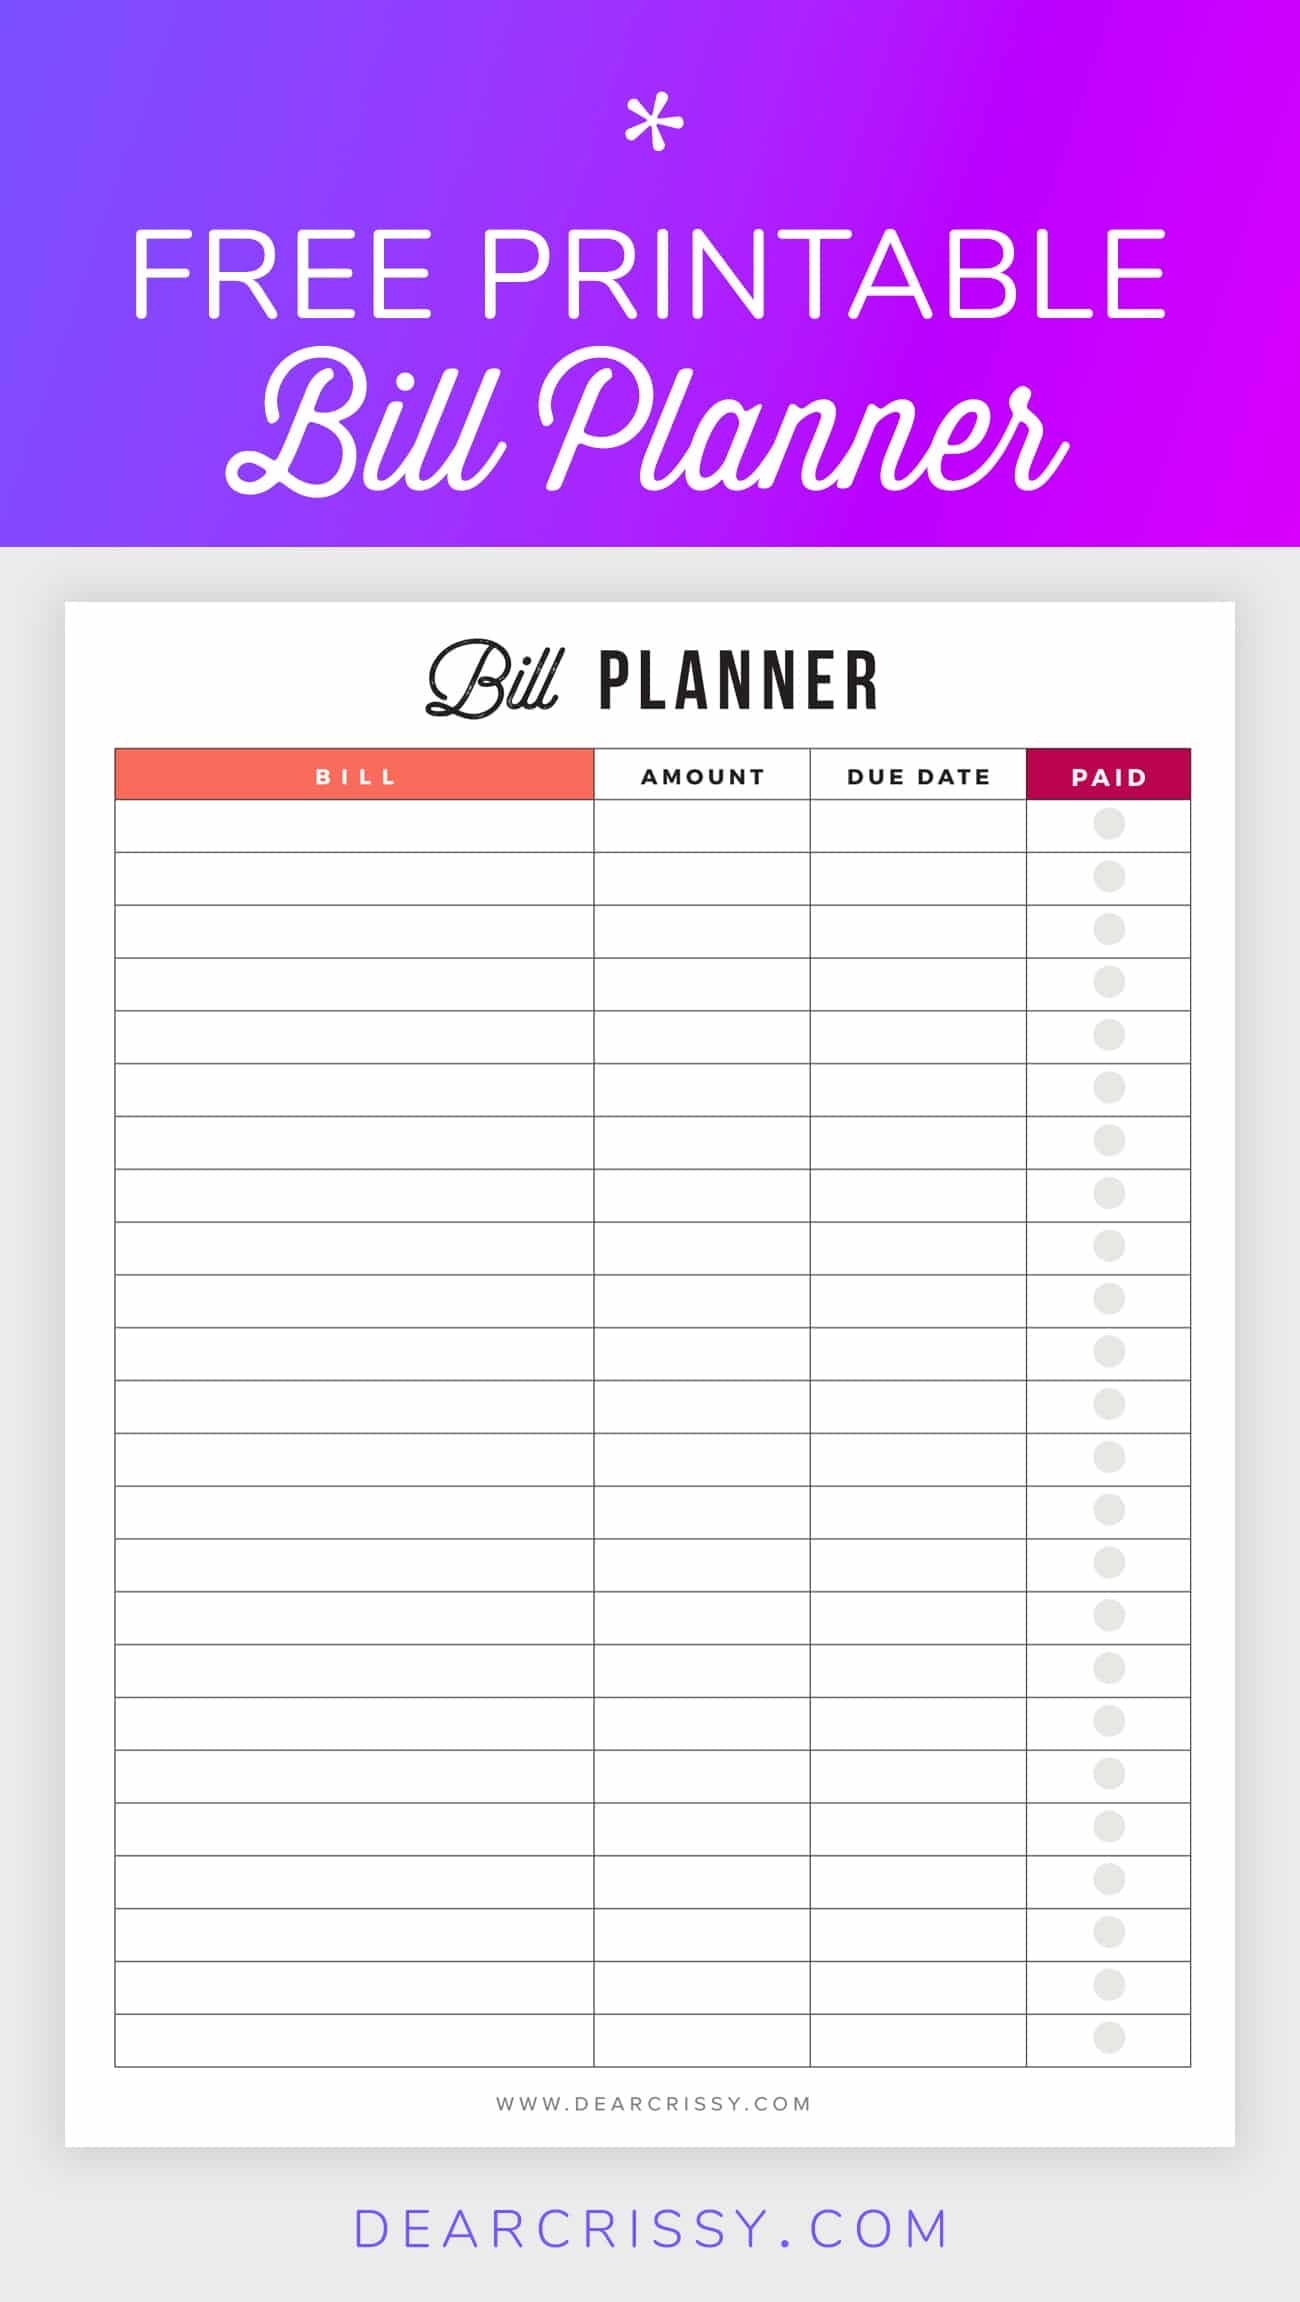 Bill Planner Printable - Pay Down Your Bills This Year! with Blank Weekly Bill Organizer Printable